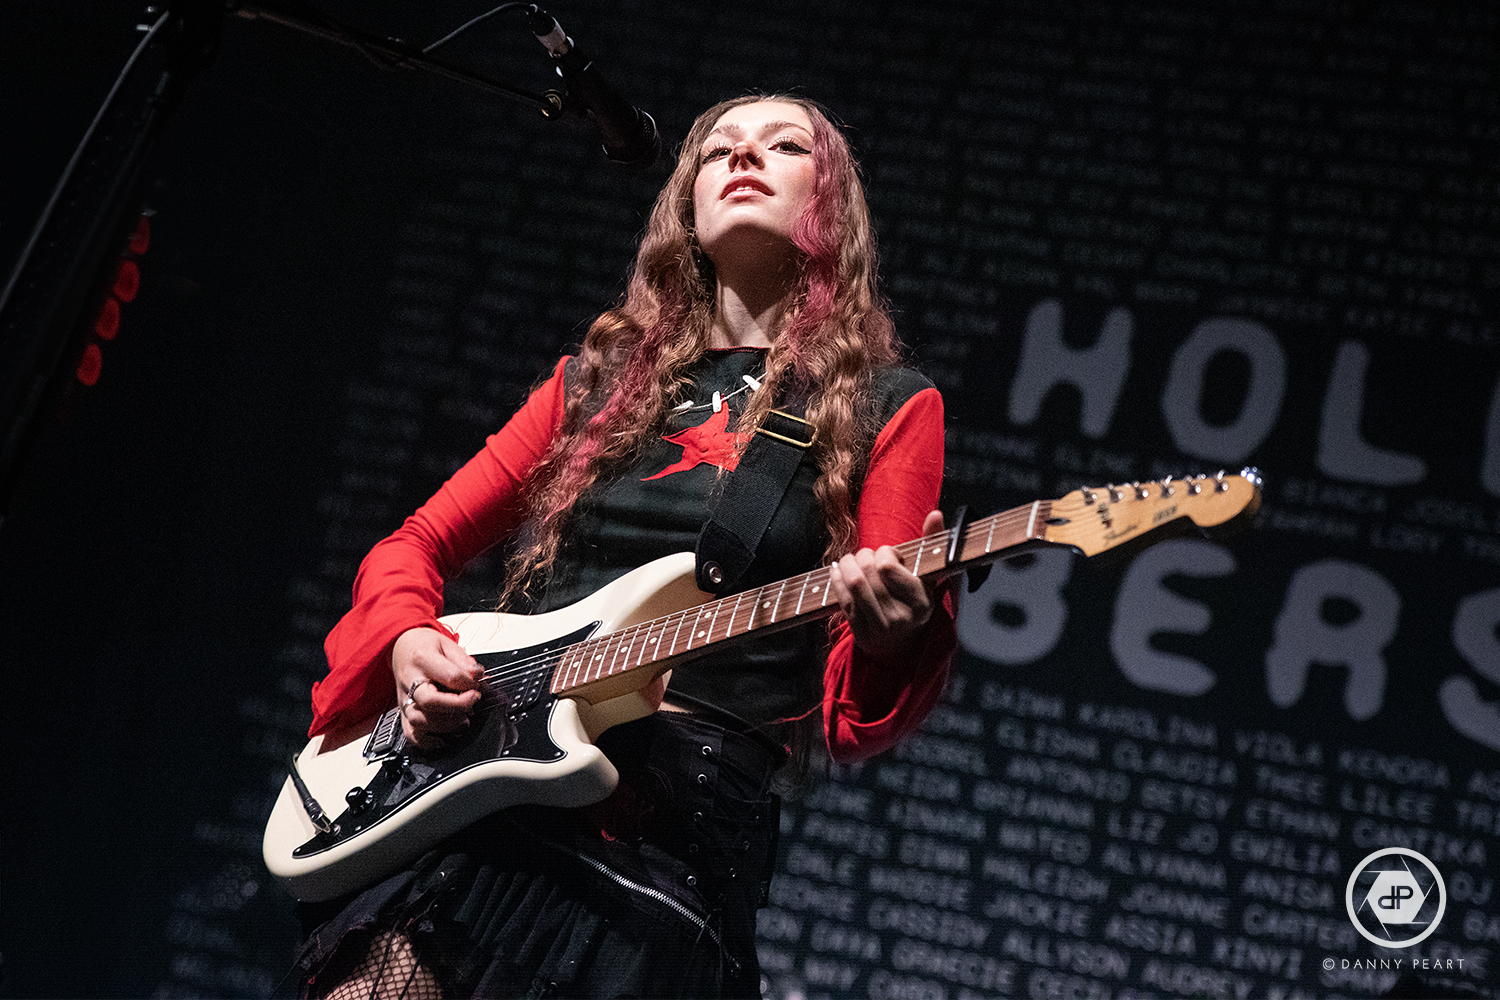 Live In Photos – Holly Humberstone – Leeds – 23/11/22